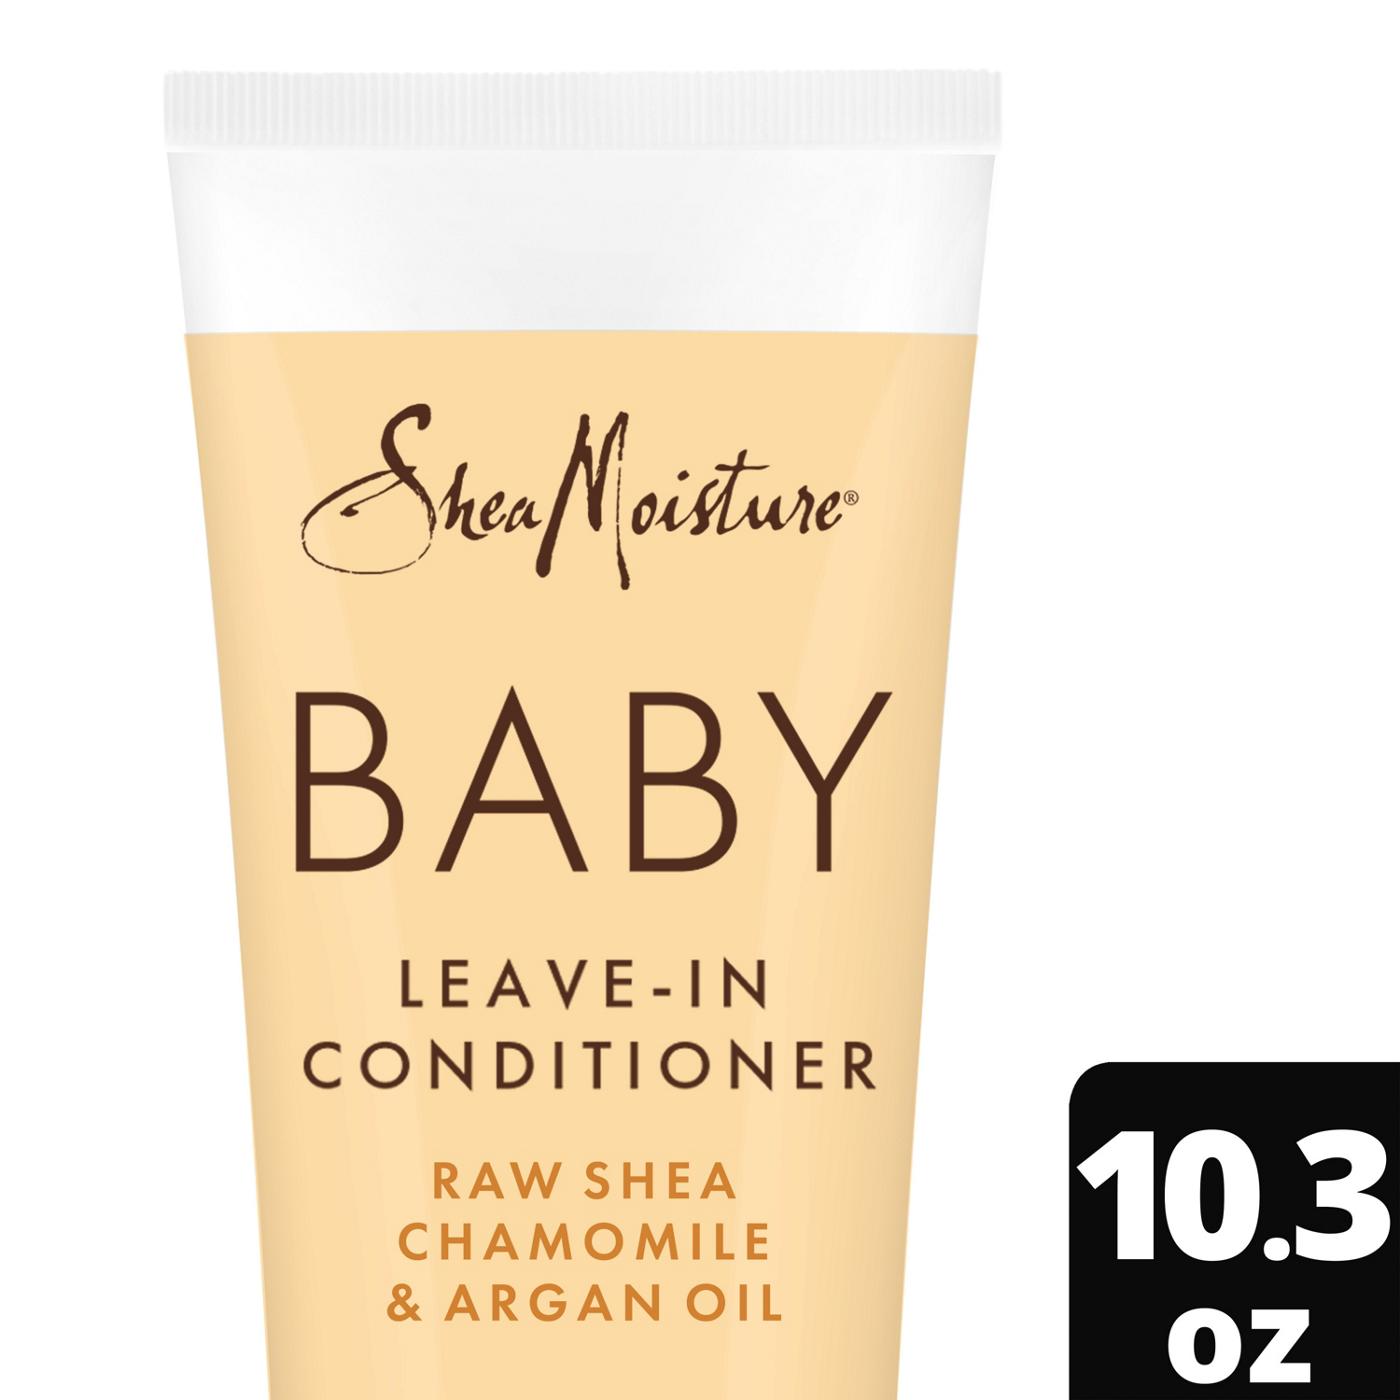 SheaMoisture Baby Leave-In Conditioner; image 7 of 7